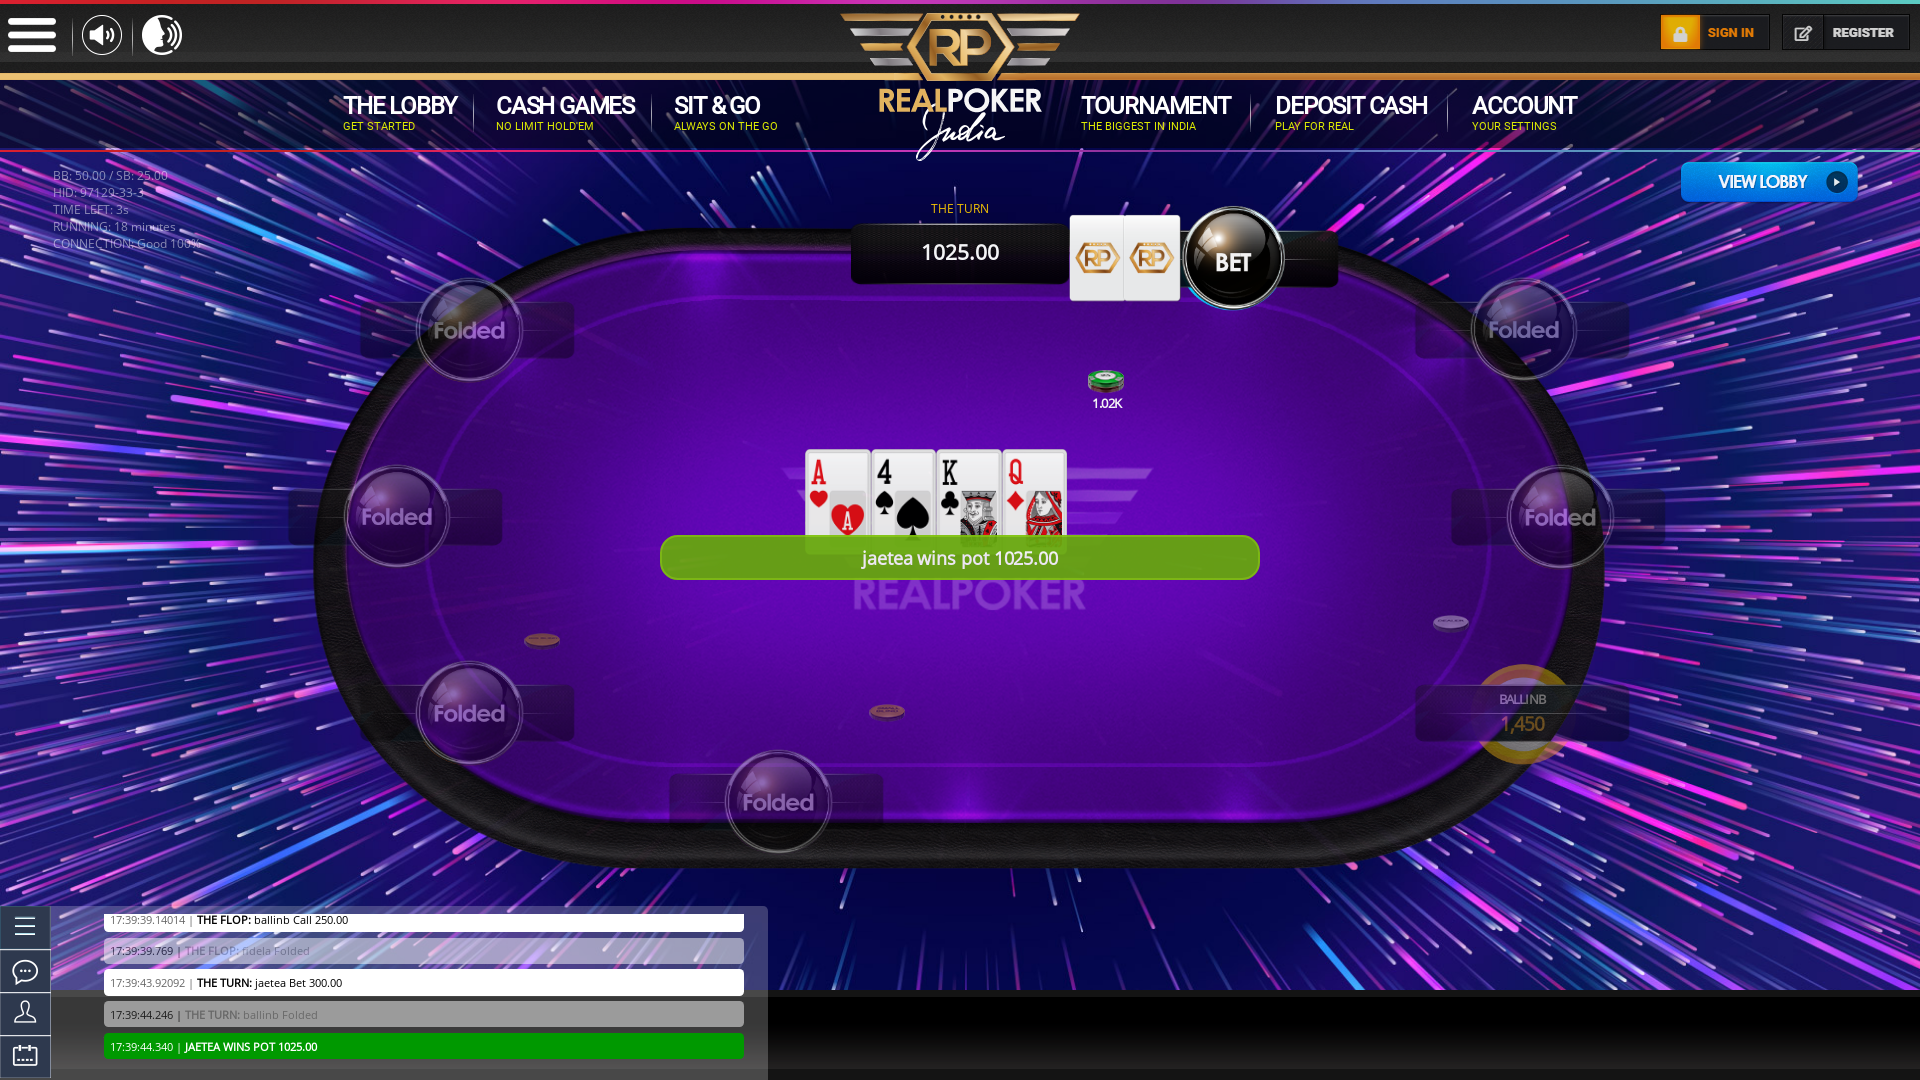 Real Indian poker on a 10 player table in the 18th minute of the game